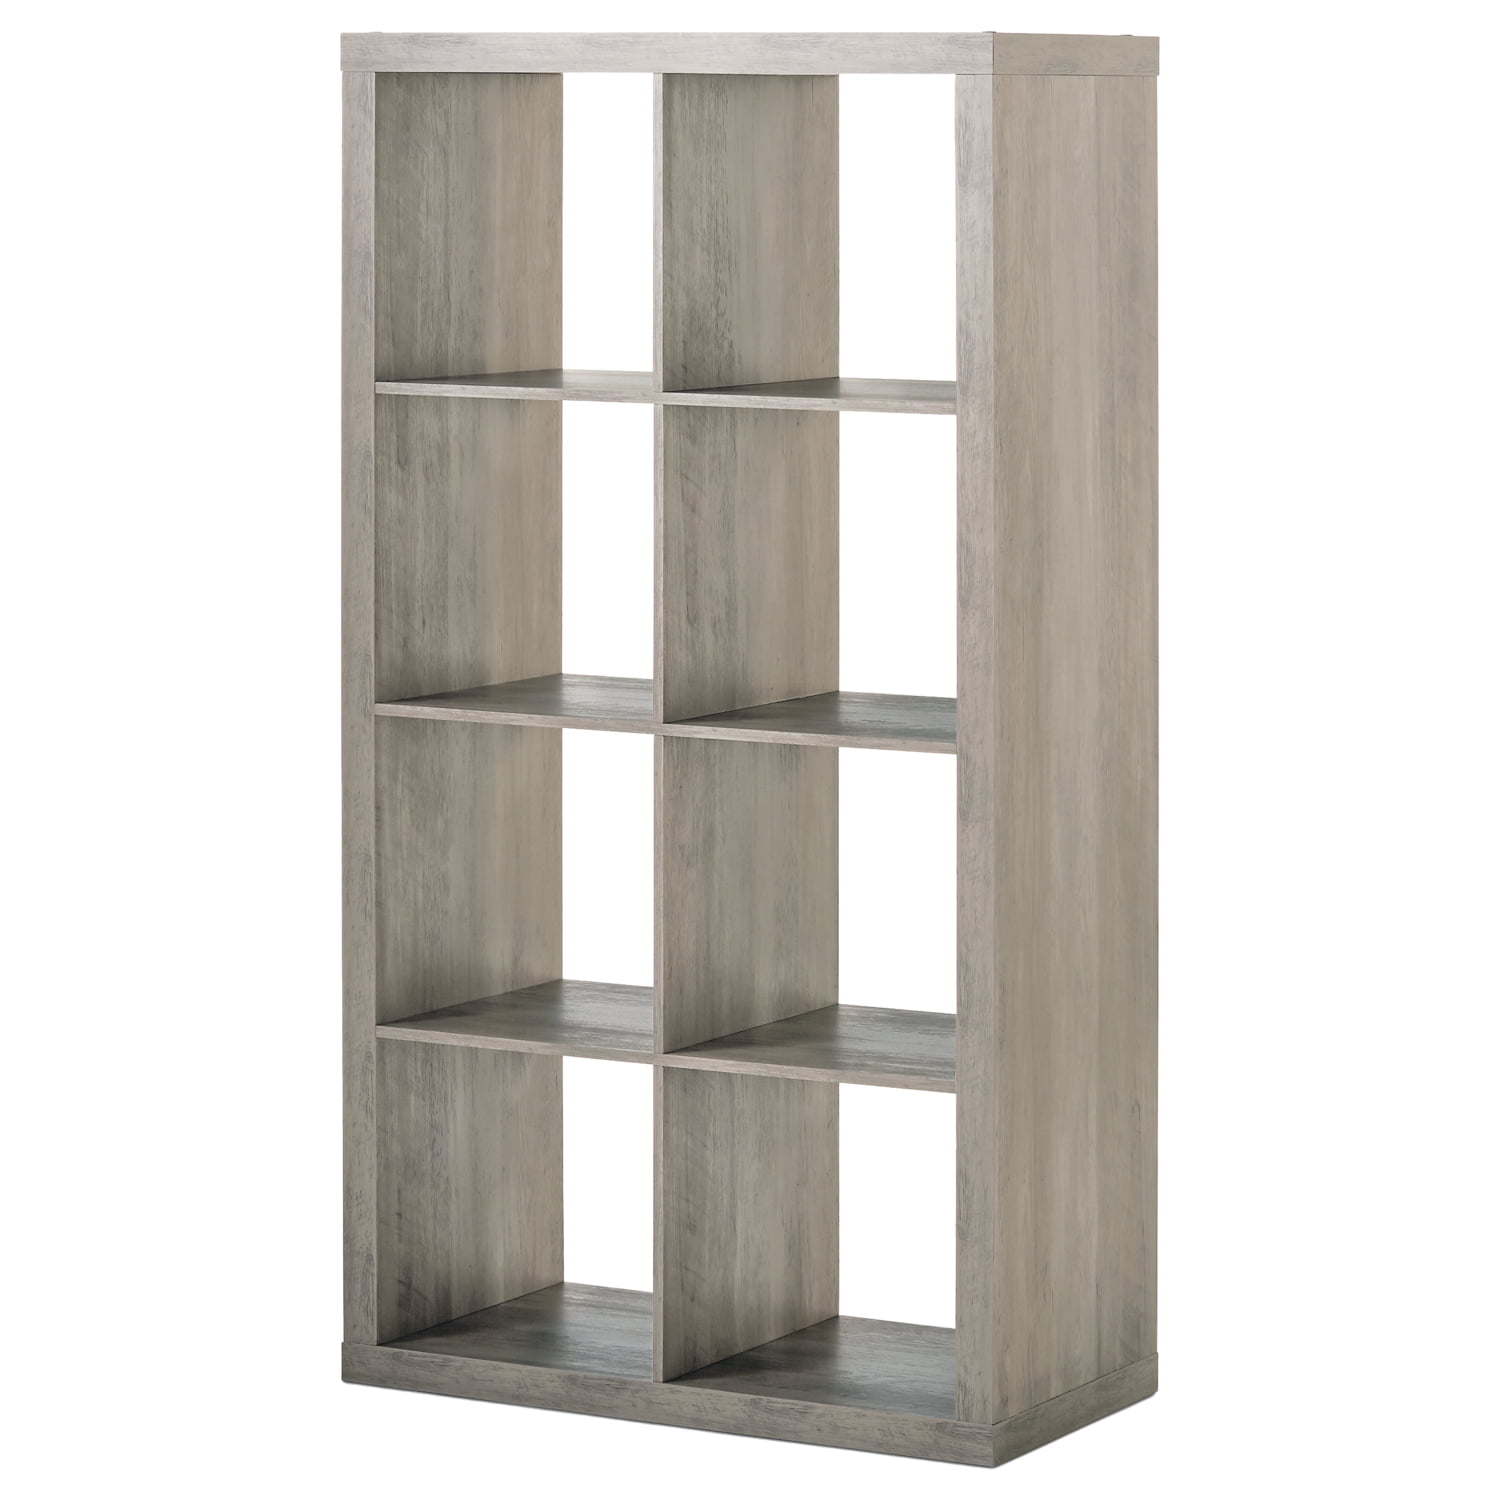 No TAX Muscle Rack Modular Cube Storage with Doors 